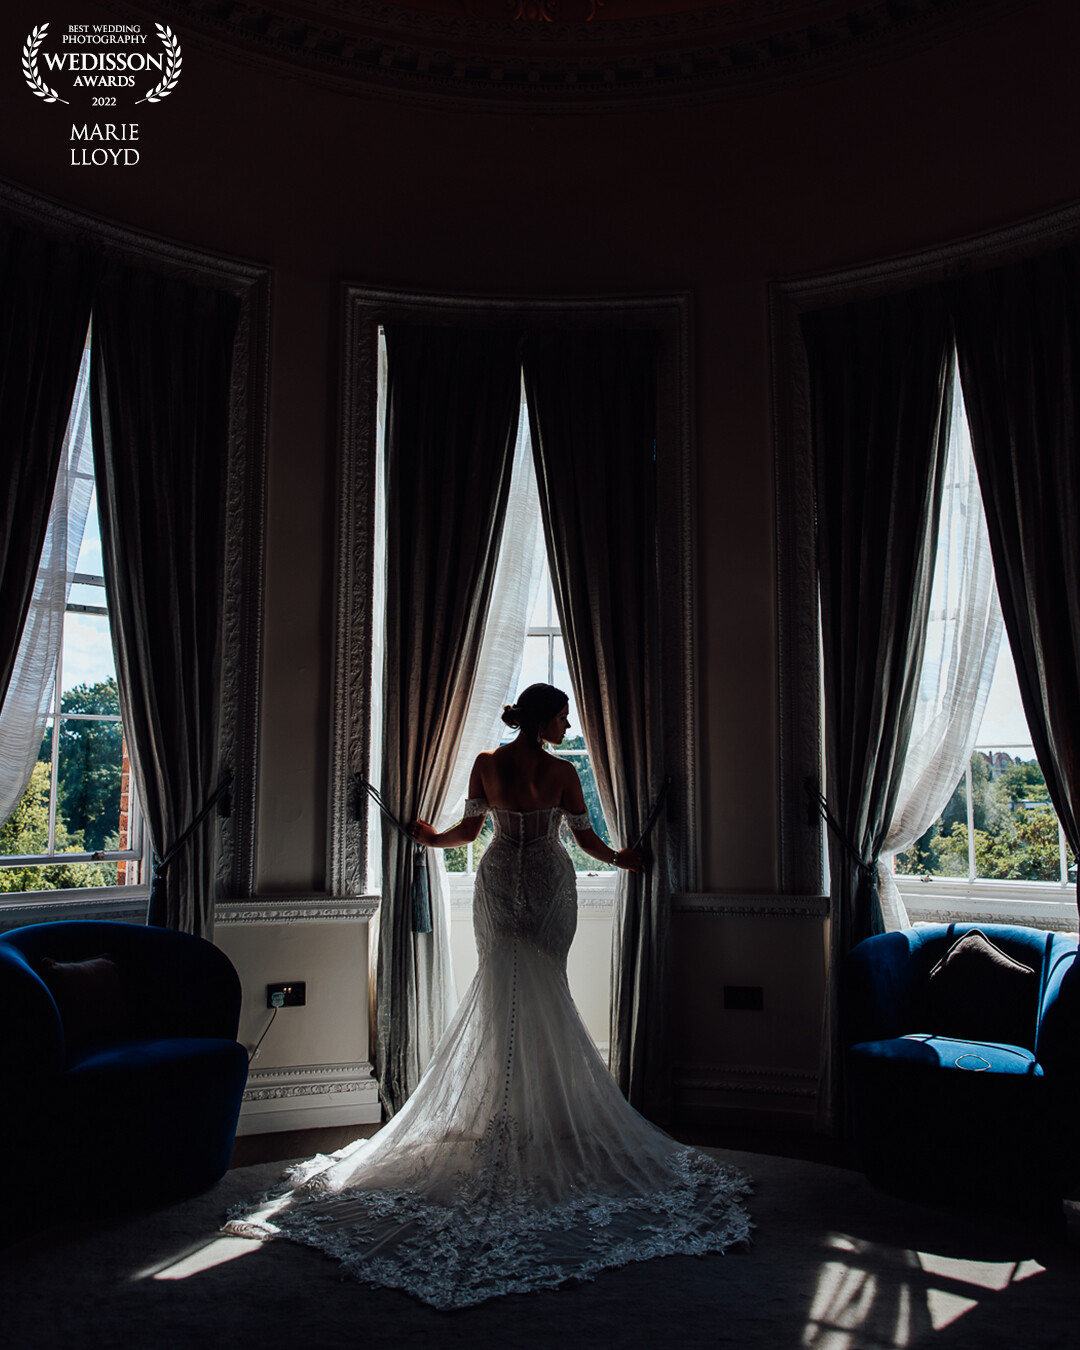 The window was used as a frame to get the bride's silhouette, the dress was fluffed out and the head was in a side profile to maximise the silhouette.